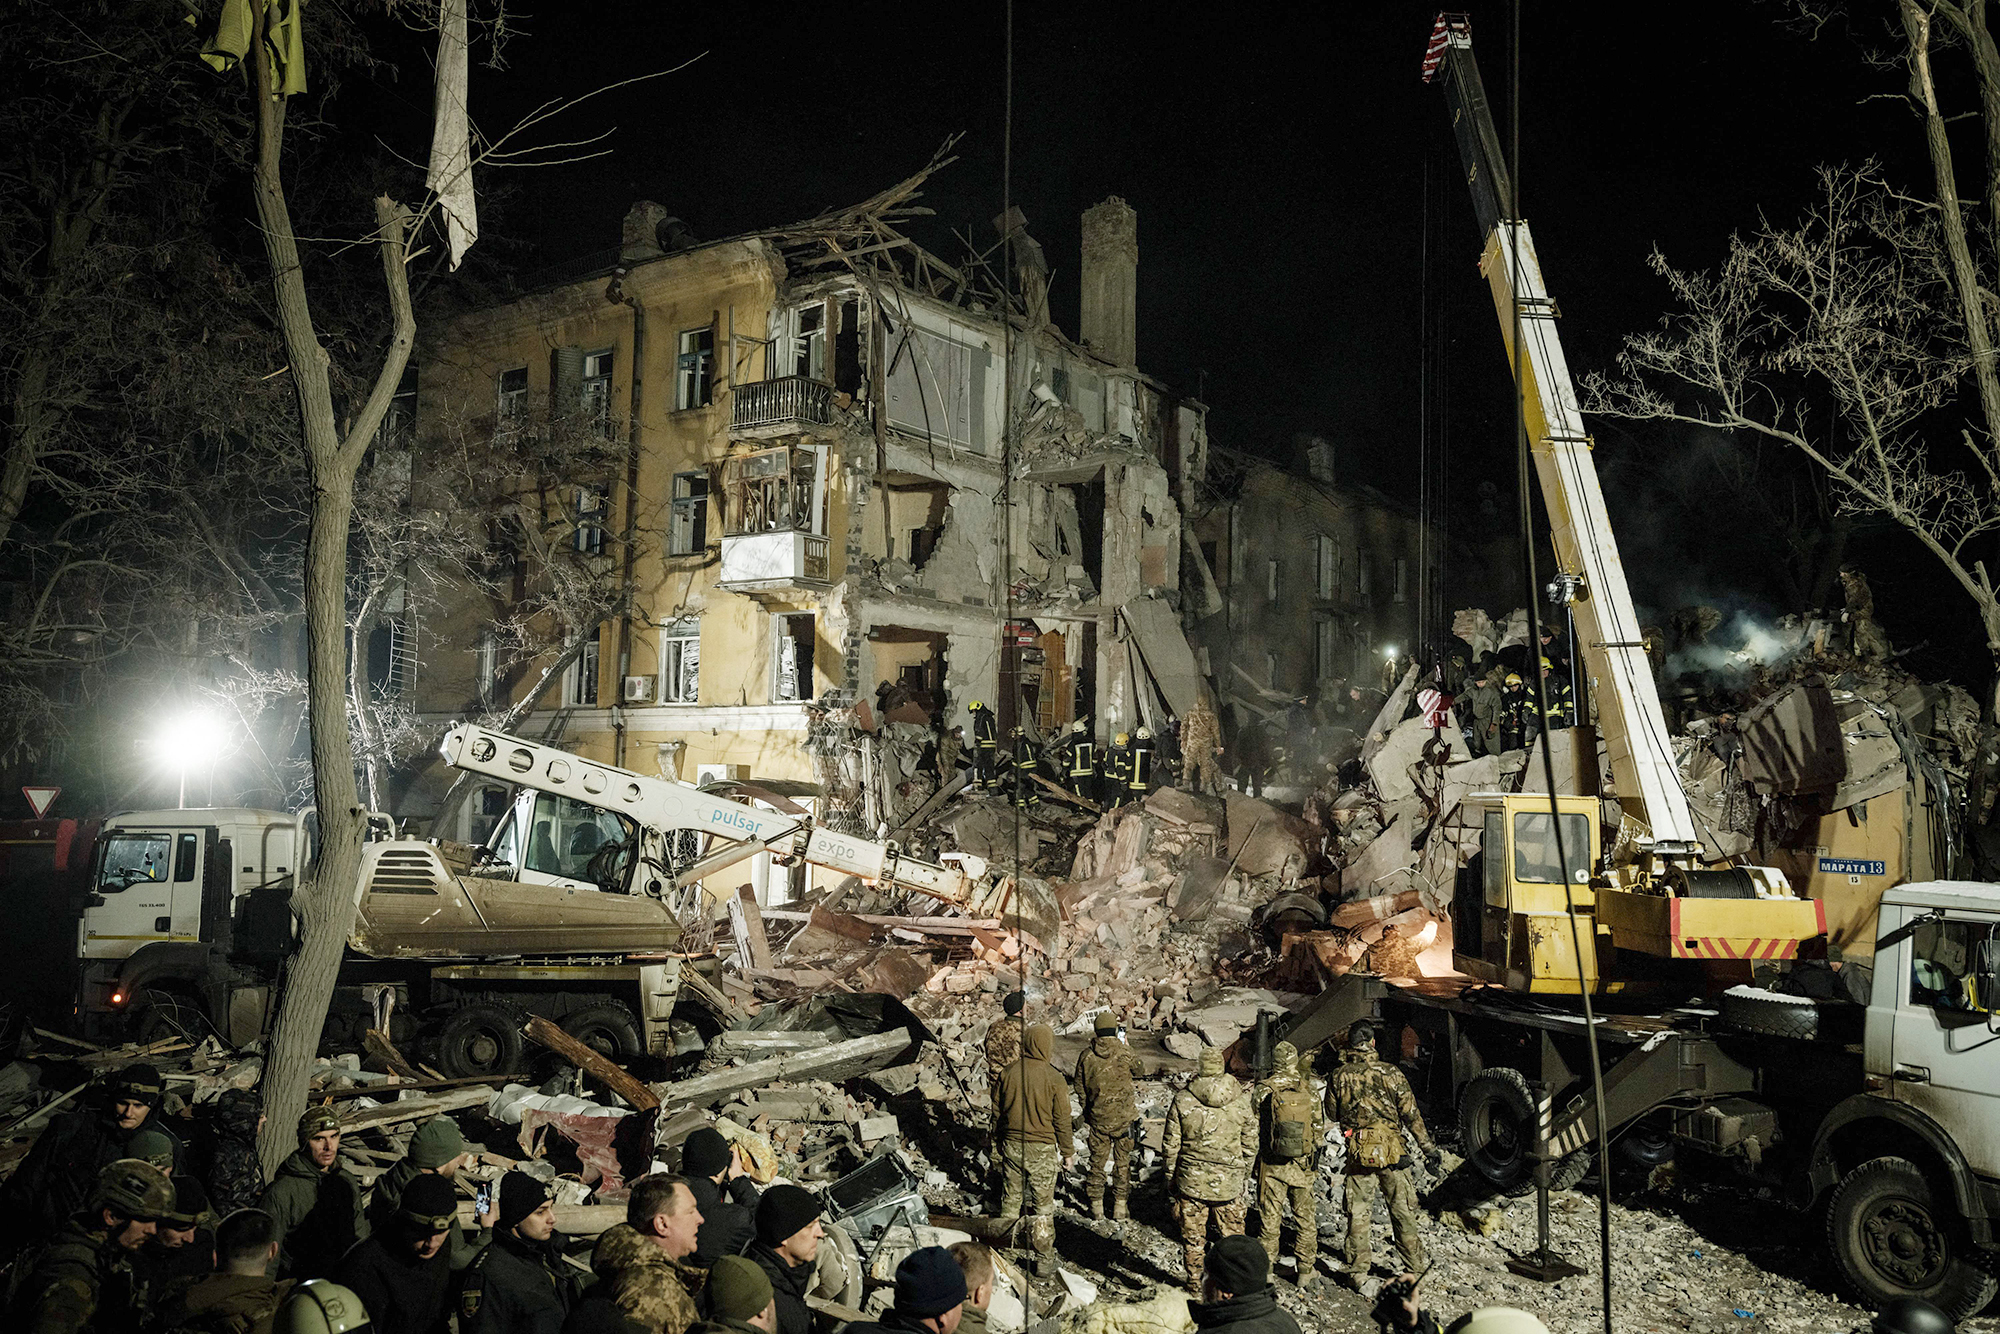 Rescuers remove debris to search for survivors at a destroyed apartment building hit by a rocket in downtown Kramatorsk, Ukraine, on February 1.